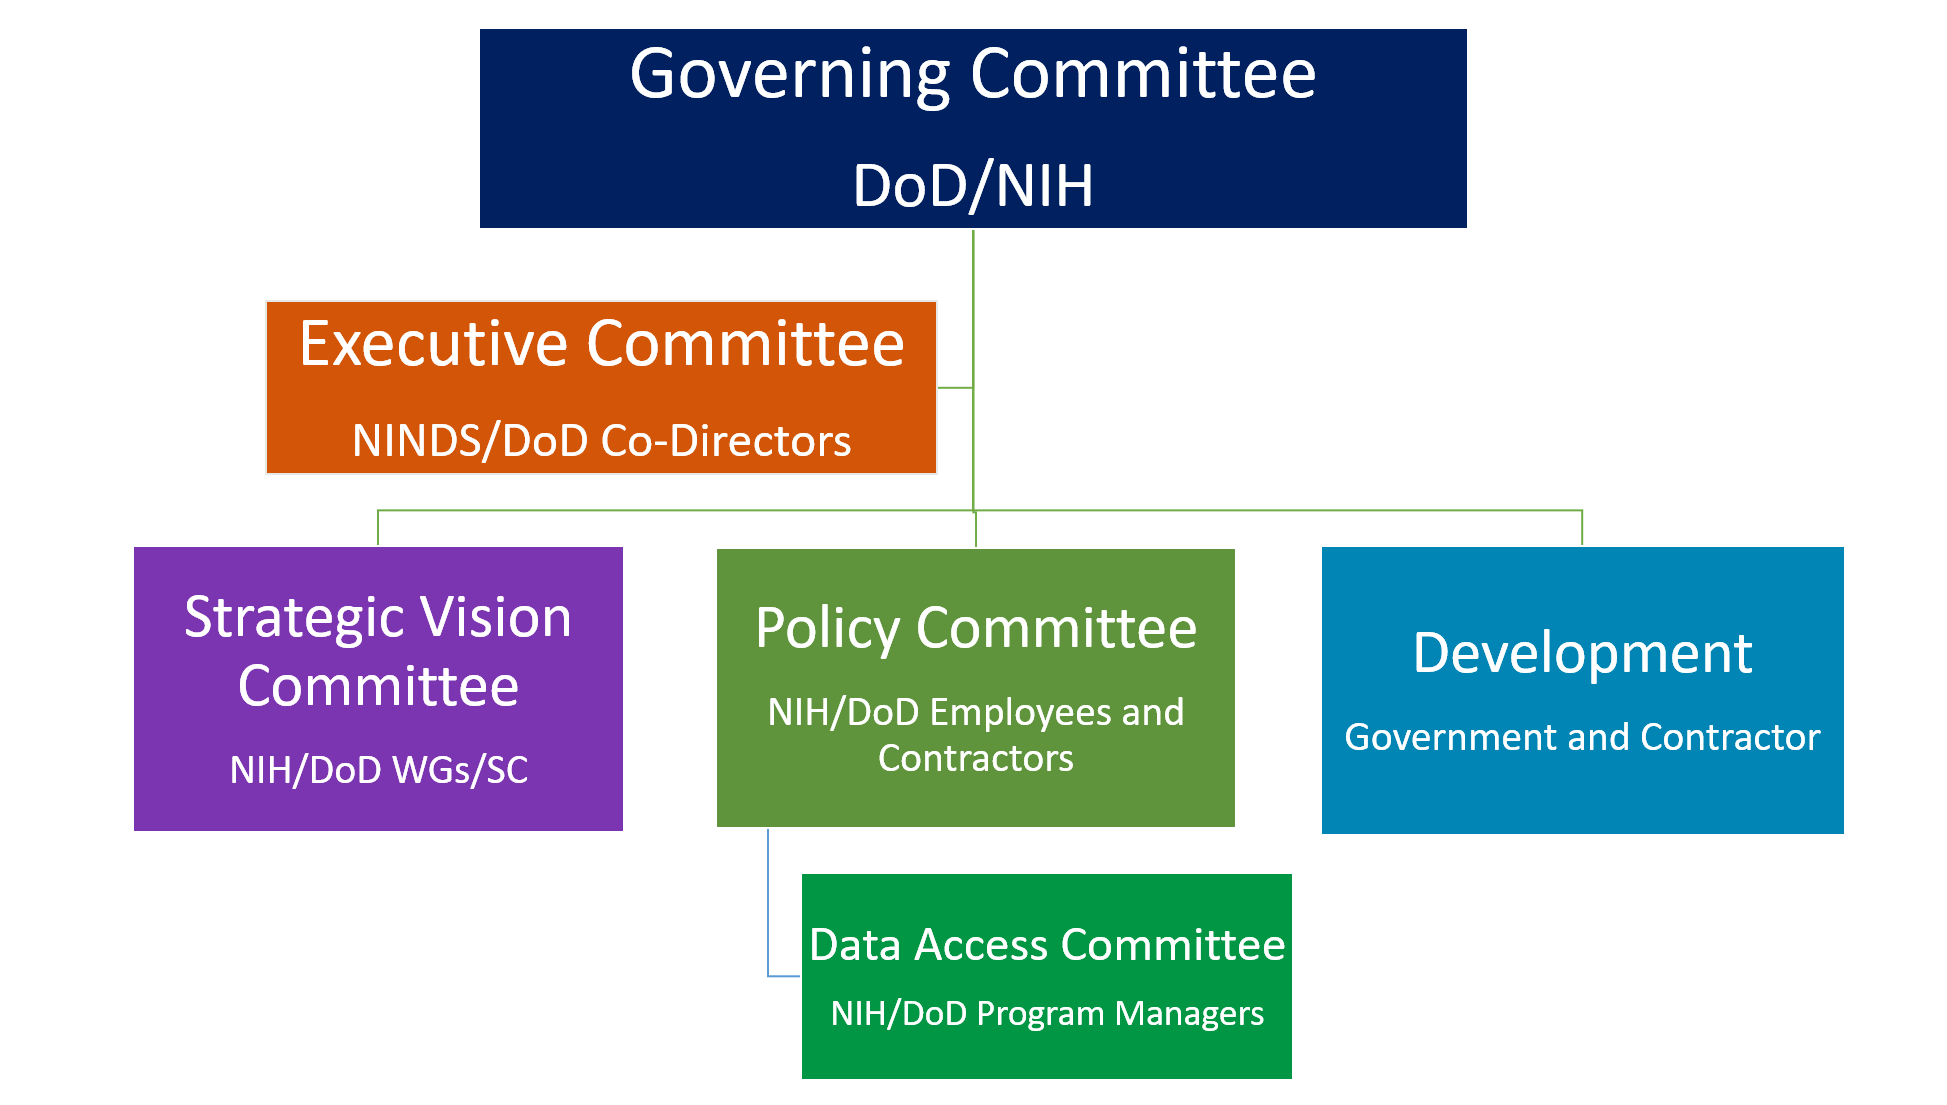 FITBIR’s overarching governance is comprised of a structure that ensures FITBIR’s goals are conceived and executed via a framework that defines boundaries to ensure delivery of the strategic vision to the FITBIR stakeholder community. Each committee ensures the right stakeholders are engaged with the Publicis Sapient partners to shape the FITBIR project roadmap.